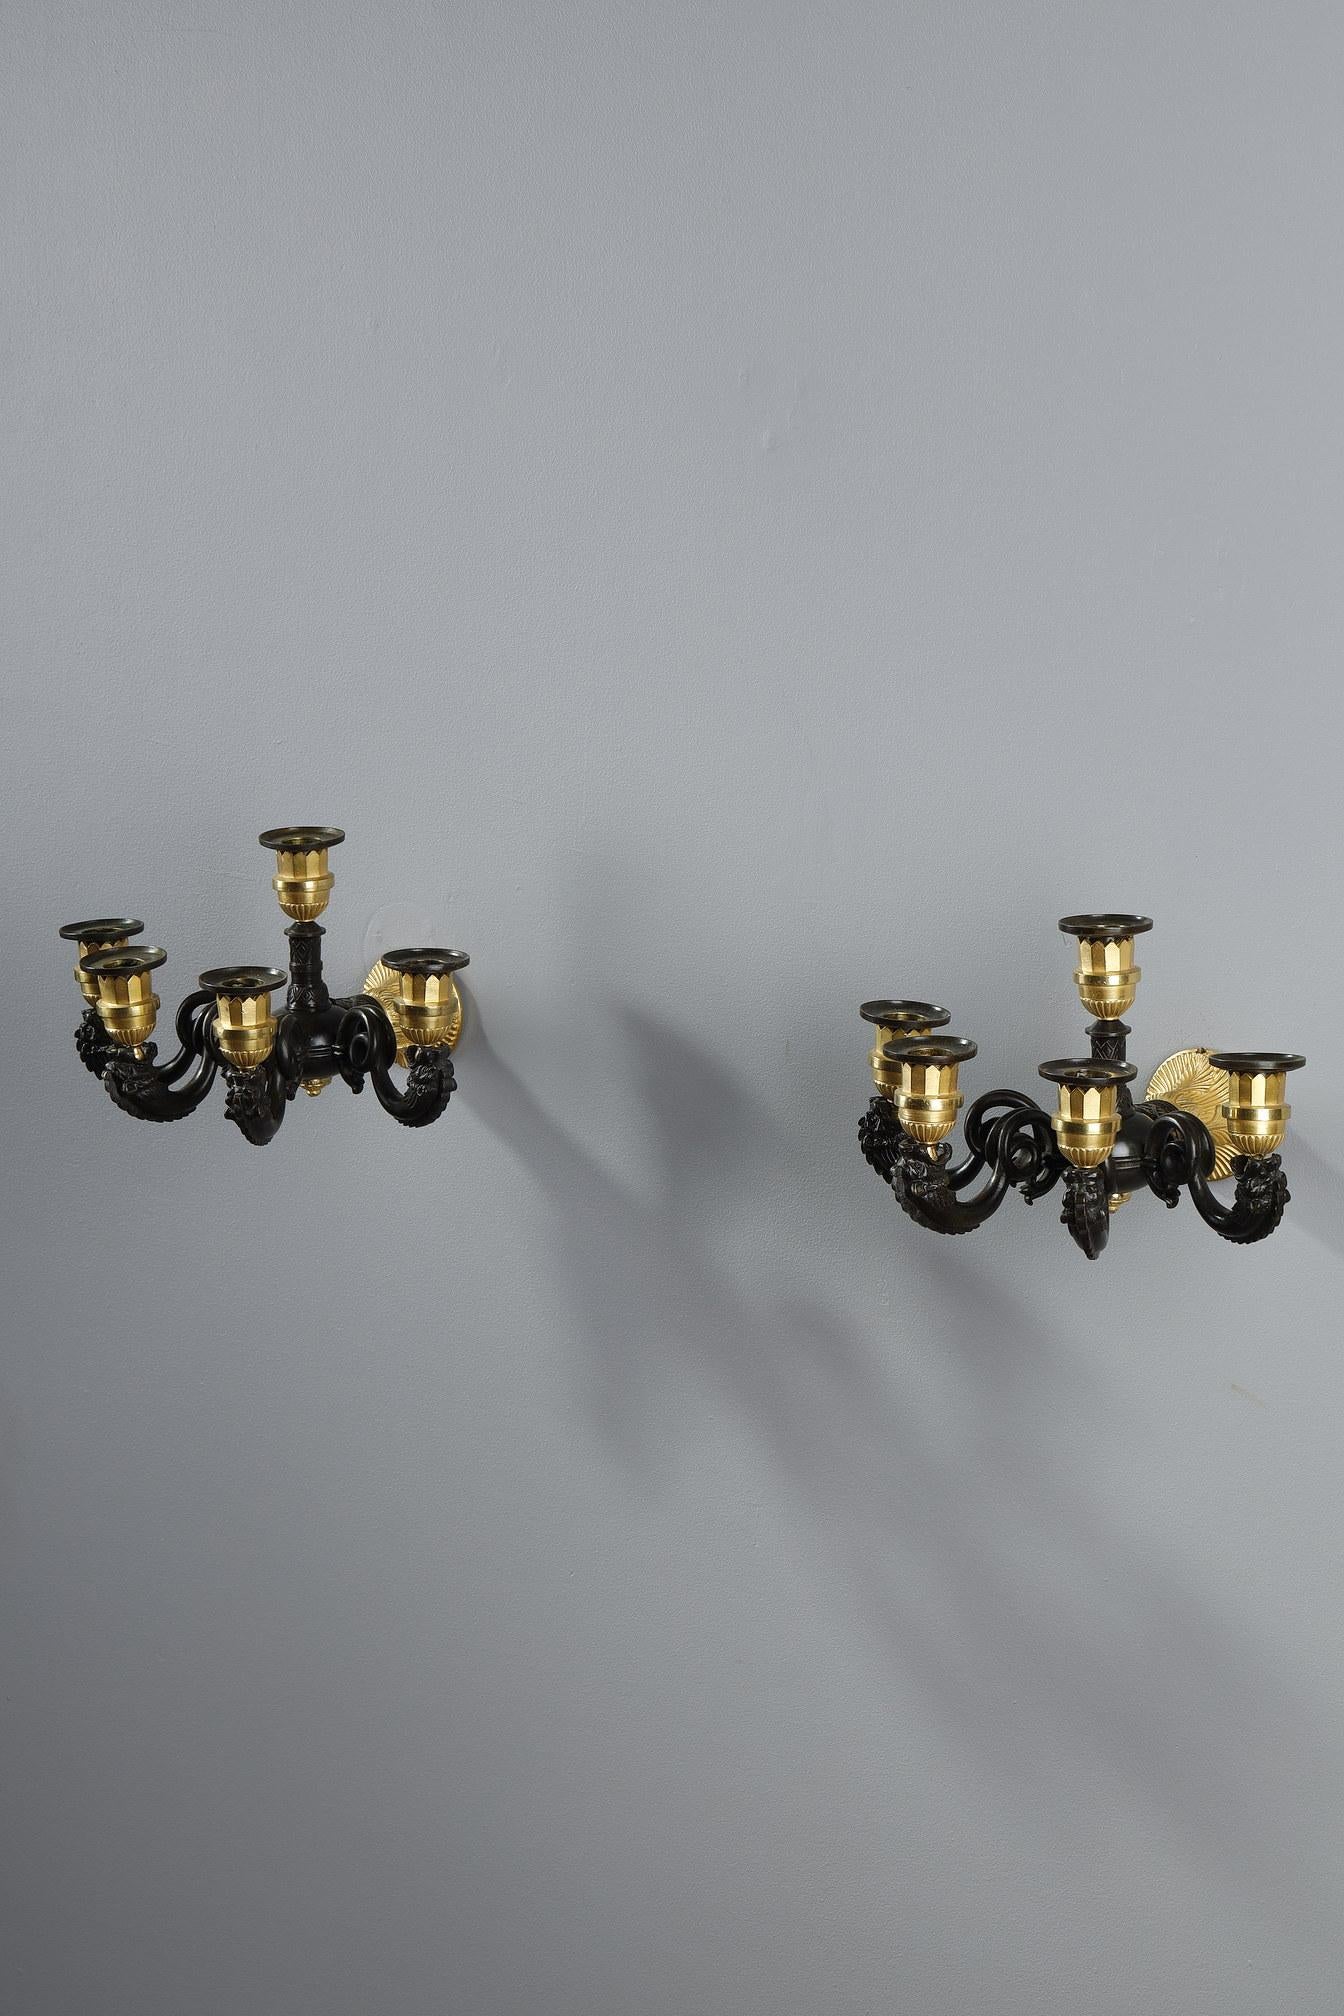 Pair of restoration period sconces with five light arms on two levels in gilt bronze and patina. The wall part is decorated with palmettes and scales motifs leading to a circular connection from which the light arms radiate. The upper right jamb is